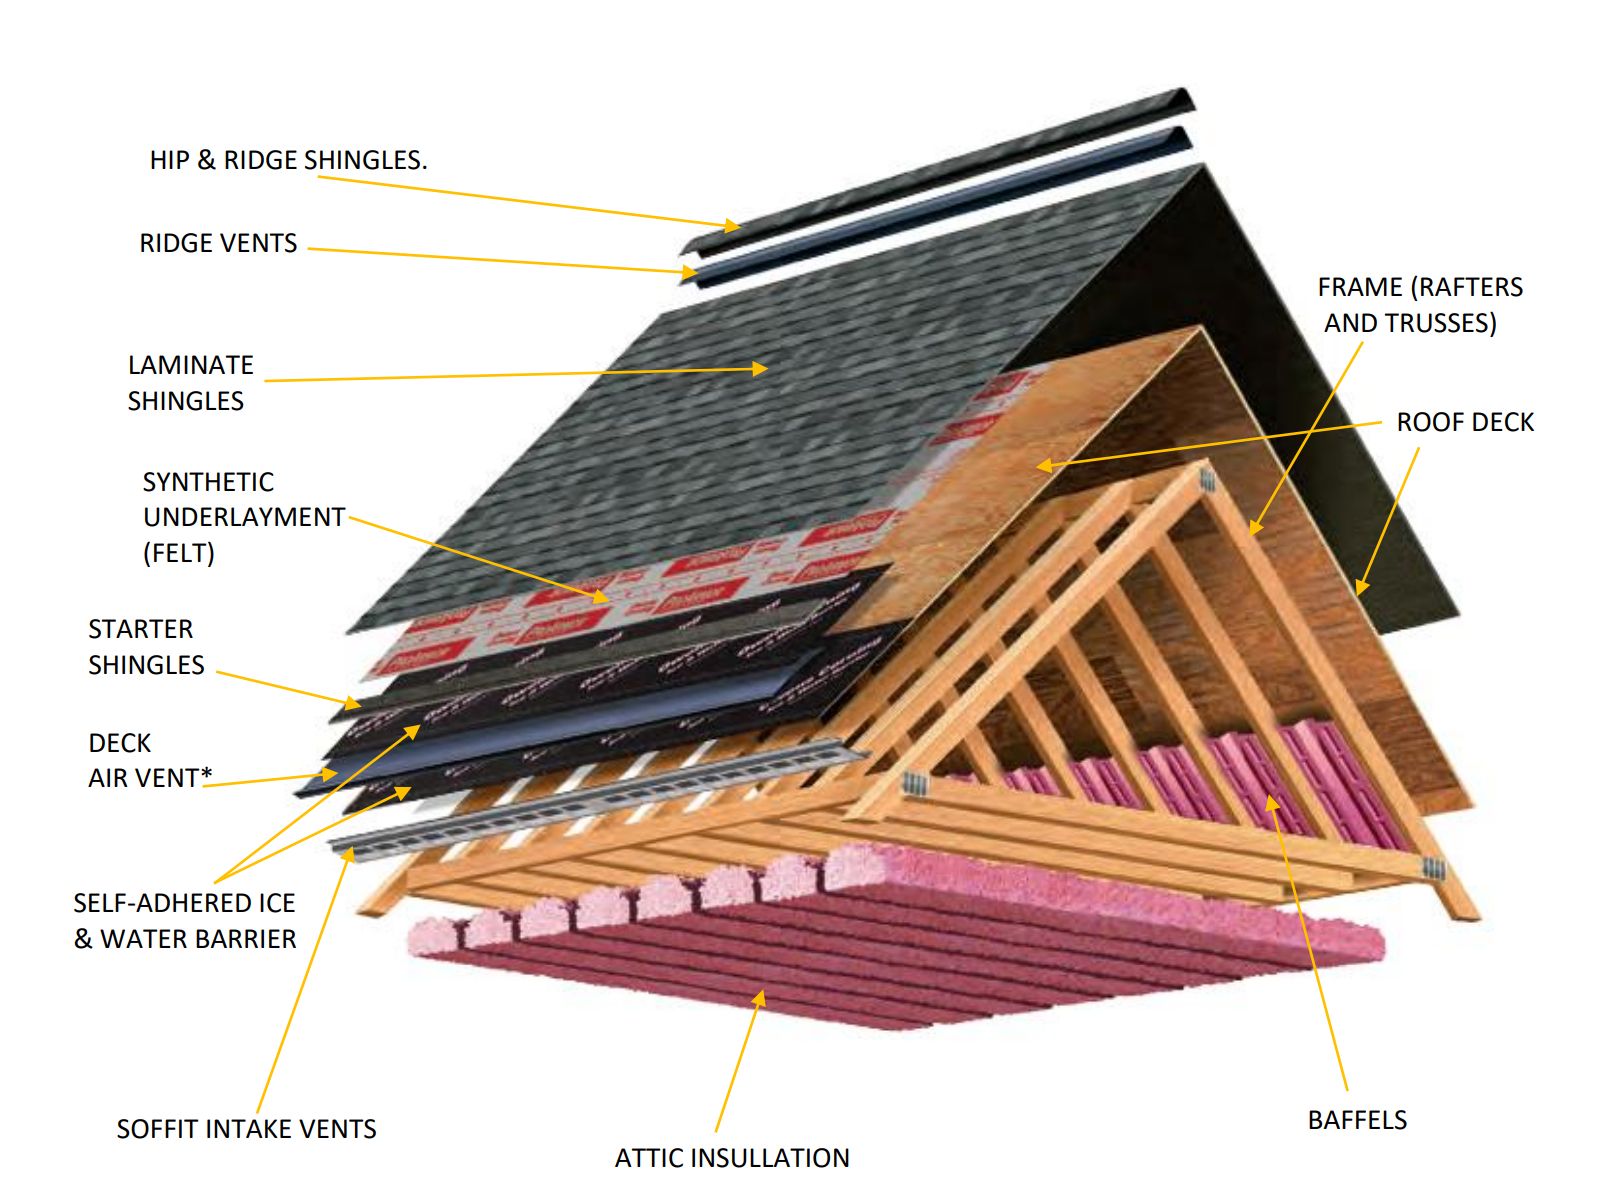 *For illustrative purposes only. Deck air vents are not typically used in conjunction with soffit intake vents.